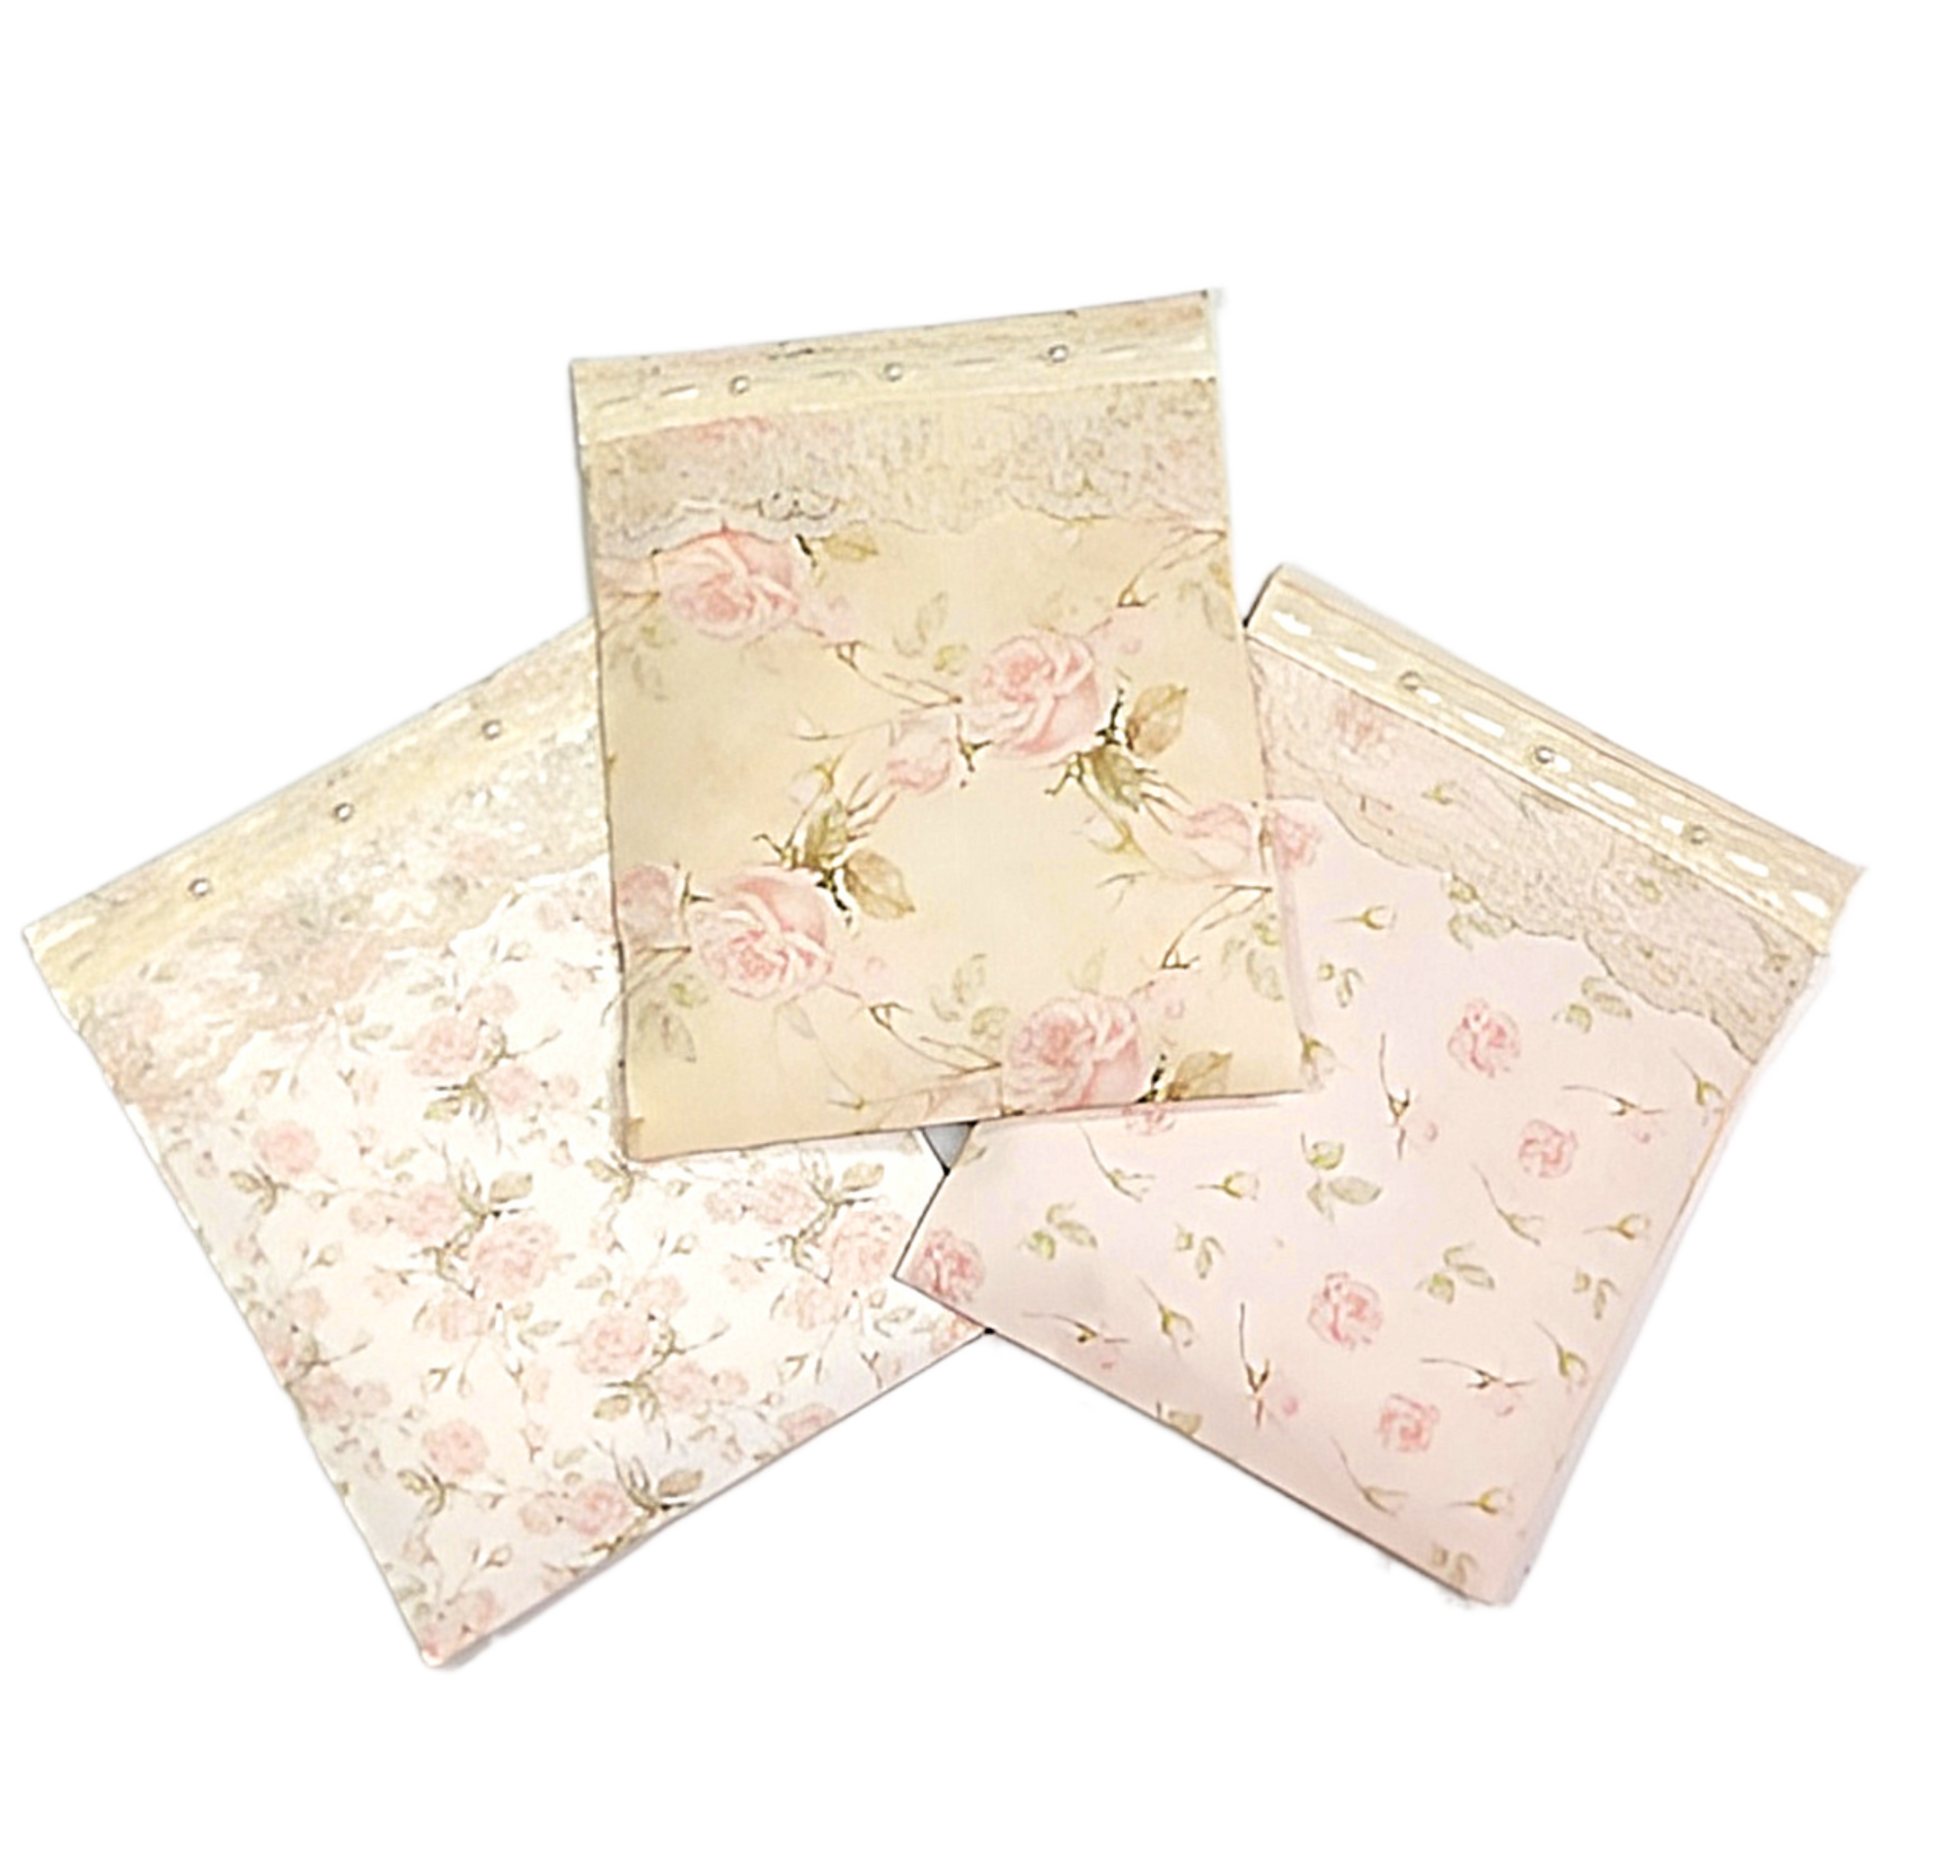 Pearls & Lace Rose Fragrance Scented Drawer & Closet Sachets, Large Size 4" x 5", 3-Pack - Chic Brico